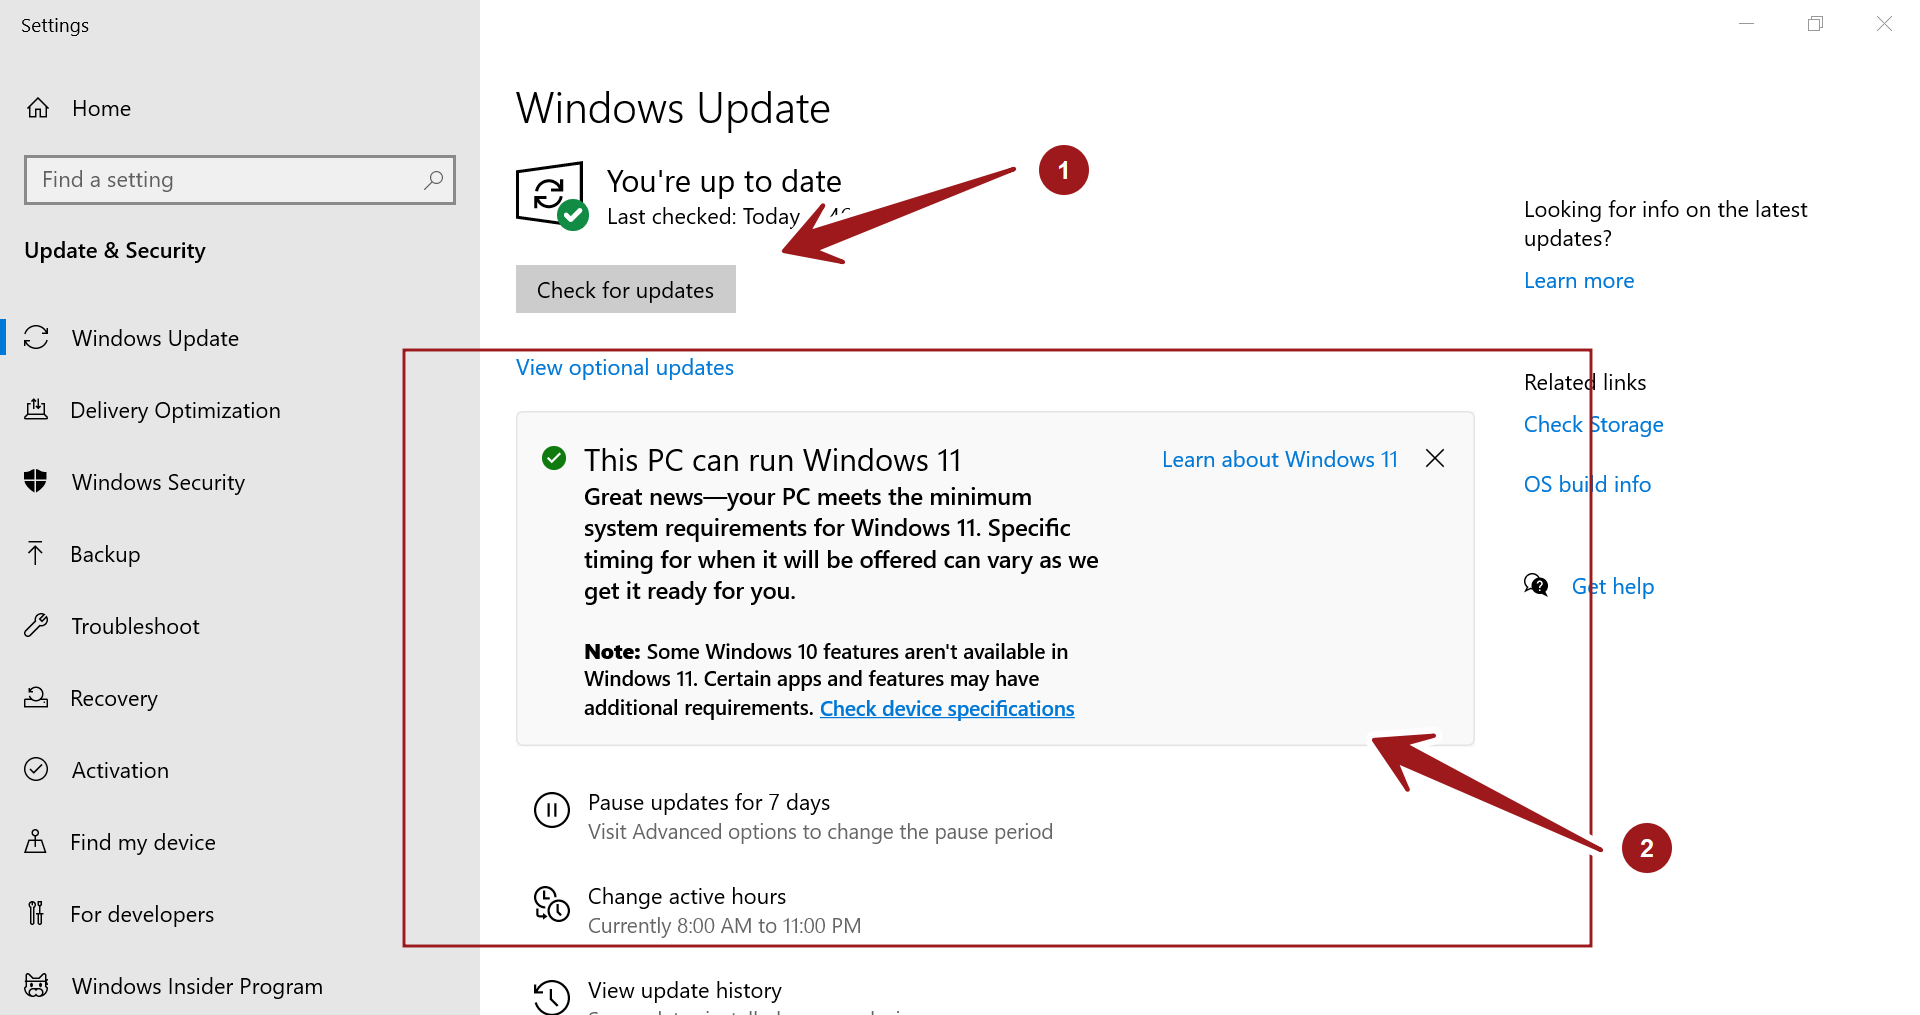 Go to the "Settings" menu in Windows and click on "Update & Security."
Click on "Check for updates" to see if there are any available updates for your operating system.